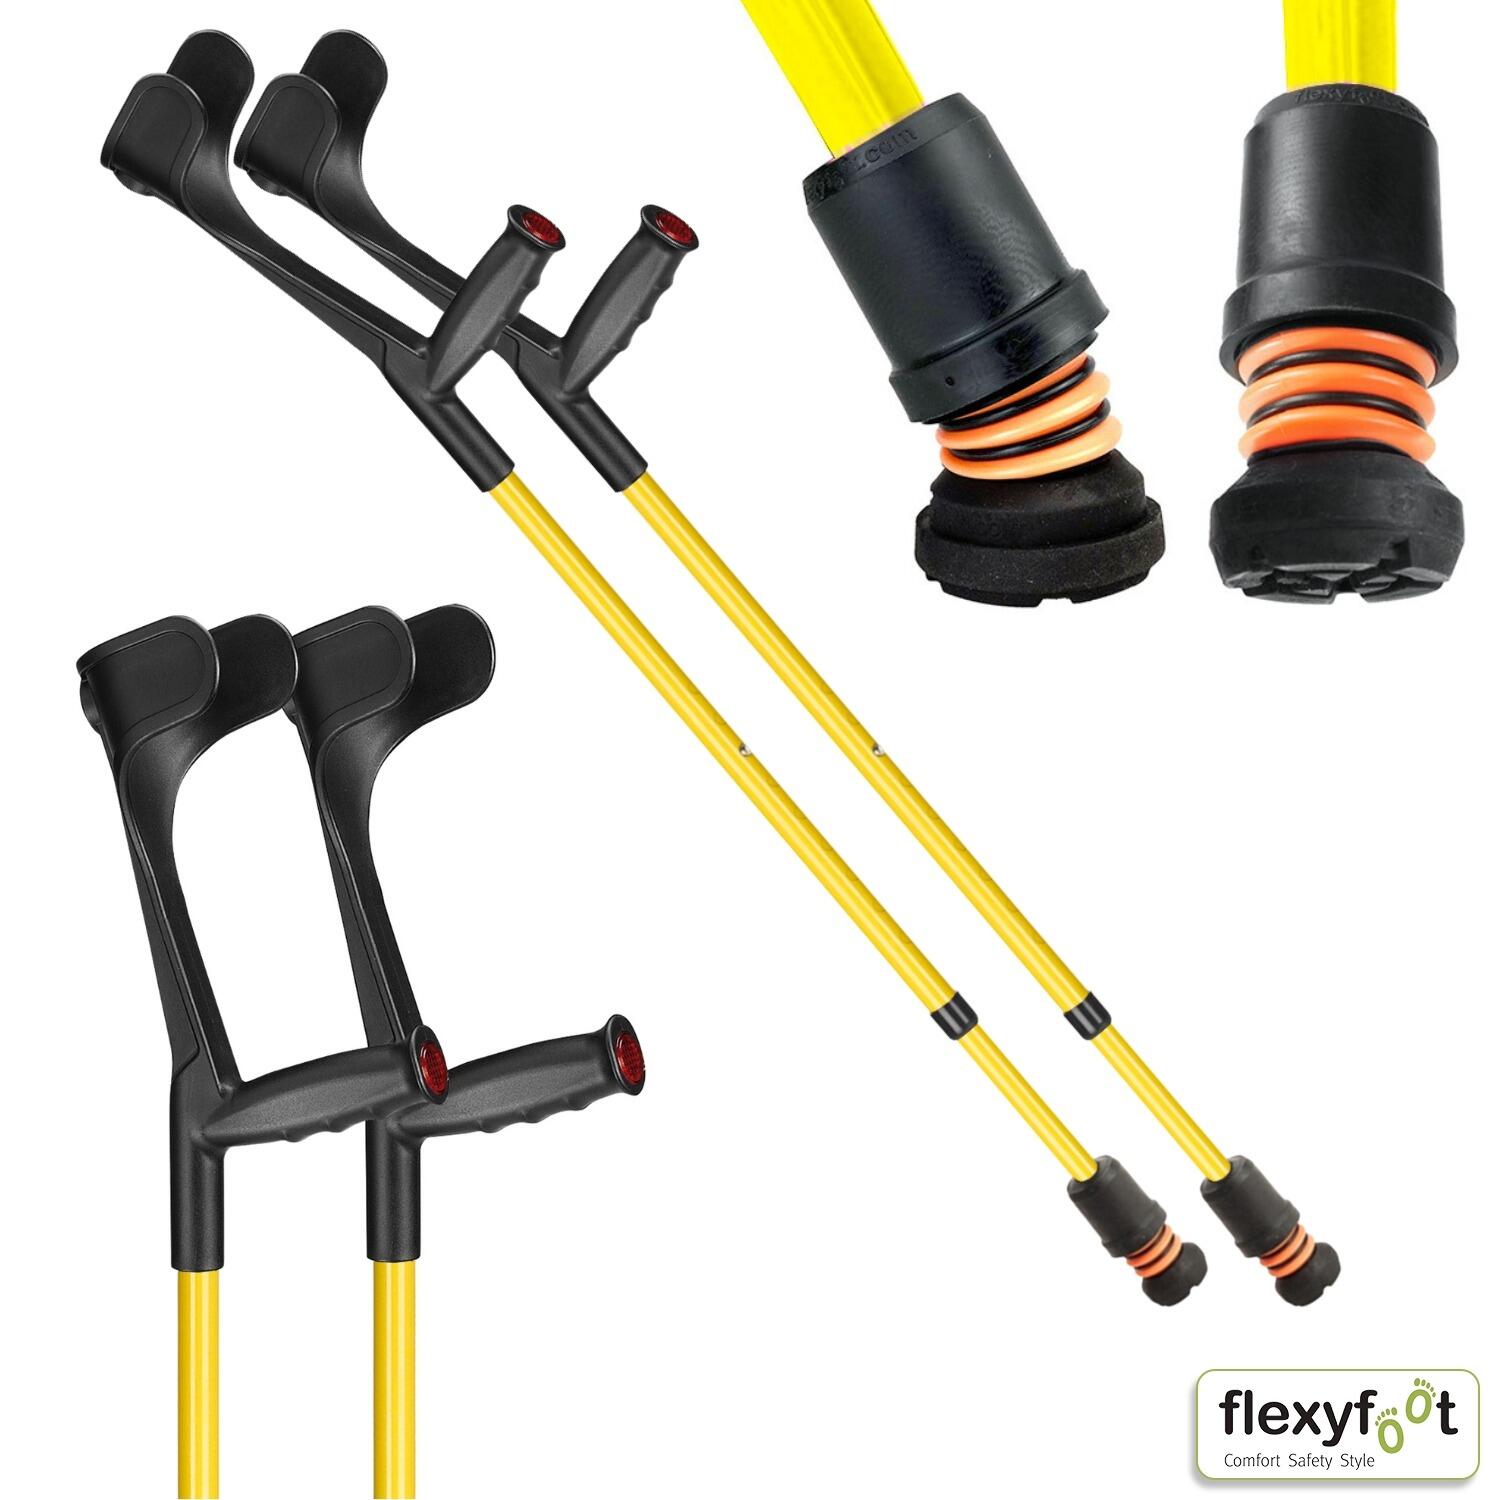 A pair of yellow Flexyfoot Soft Grip Open Cuff Crutches